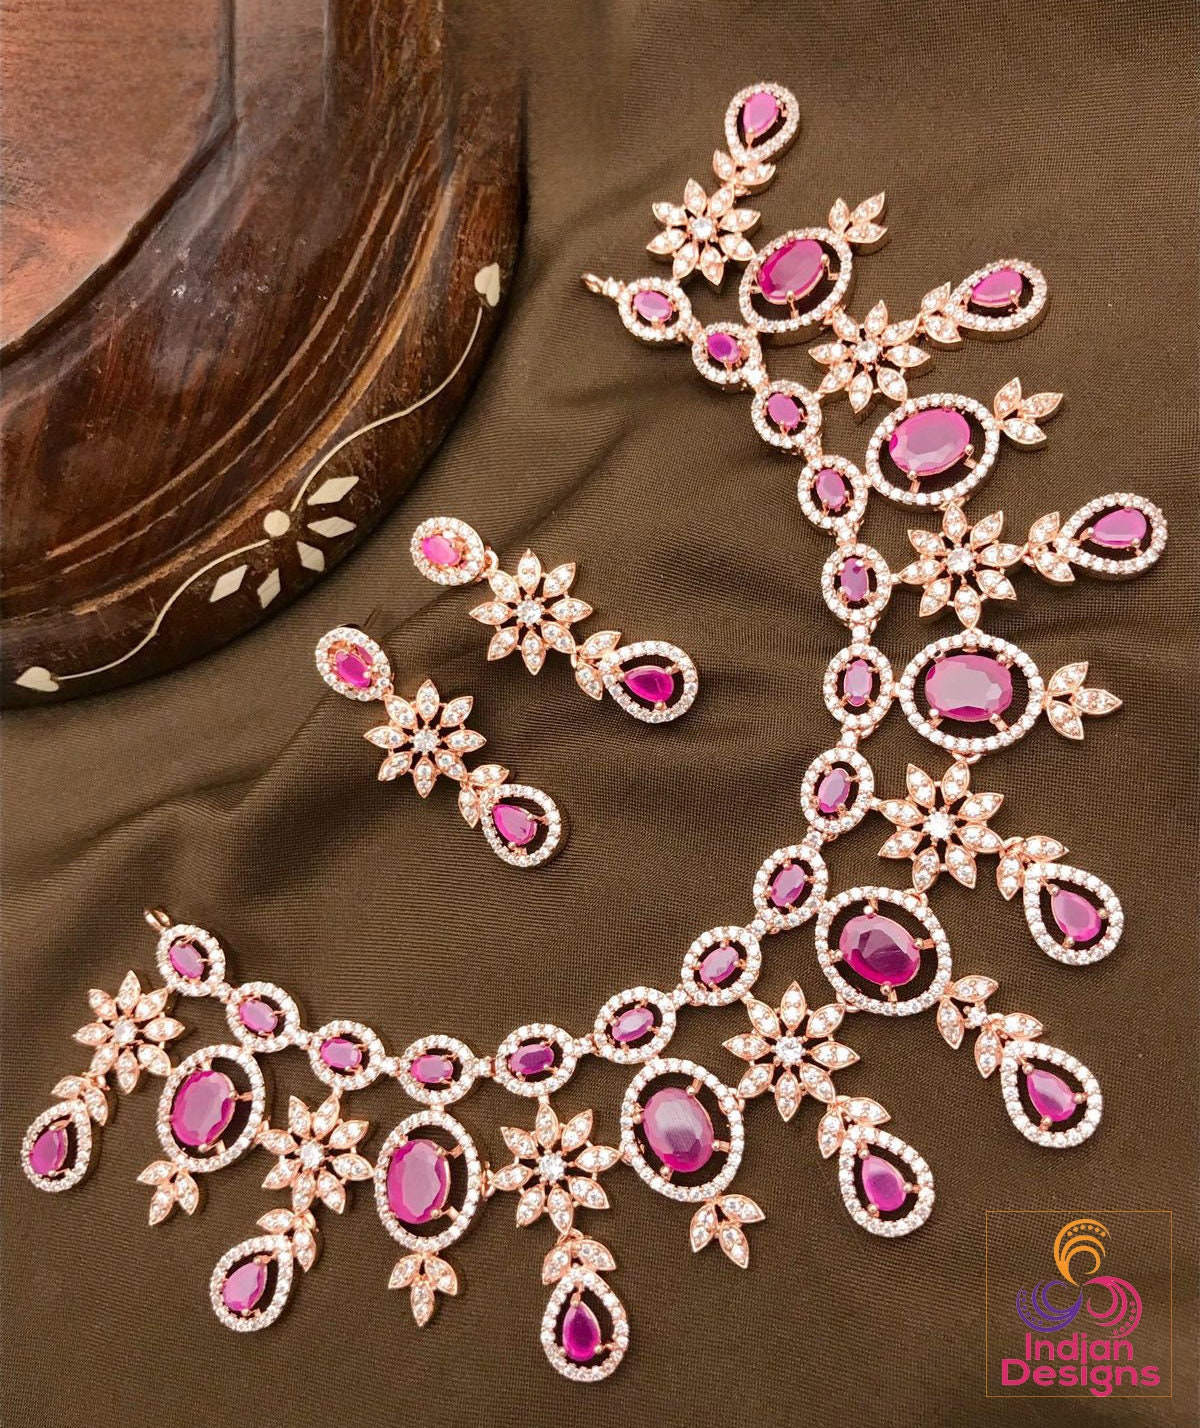 American Diamond Rose Gold Necklace Earrings Wedding Necklace set | Pink Cz Stone Indian Jewelry |Statement Necklace |Indian Designs Jewelry